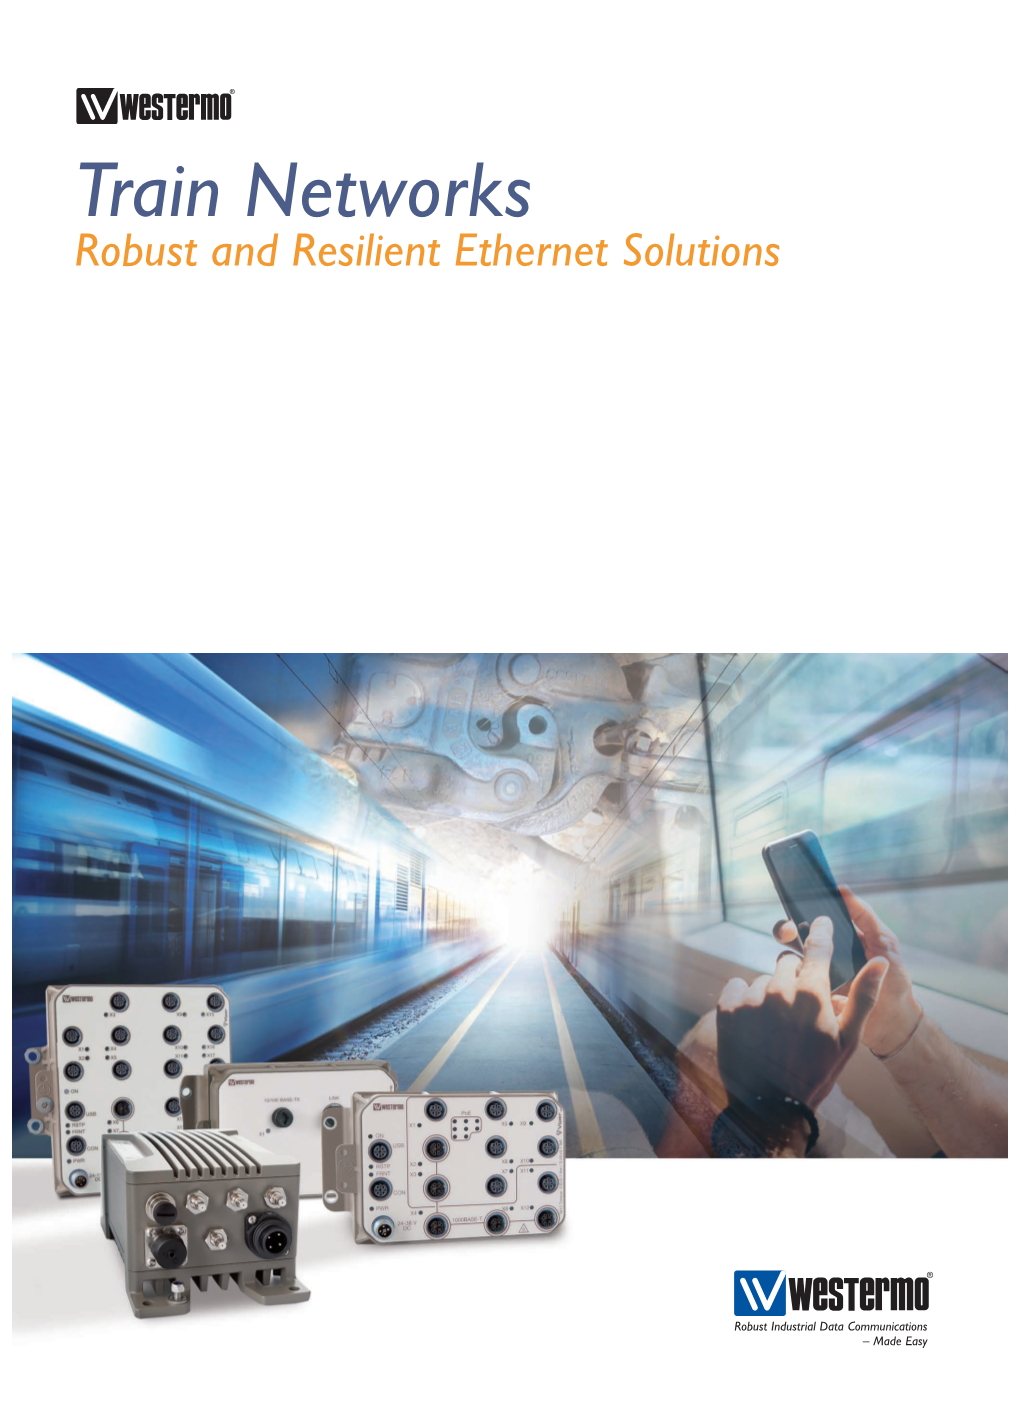 Train Networks Robust and Resilient Ethernet Solutions